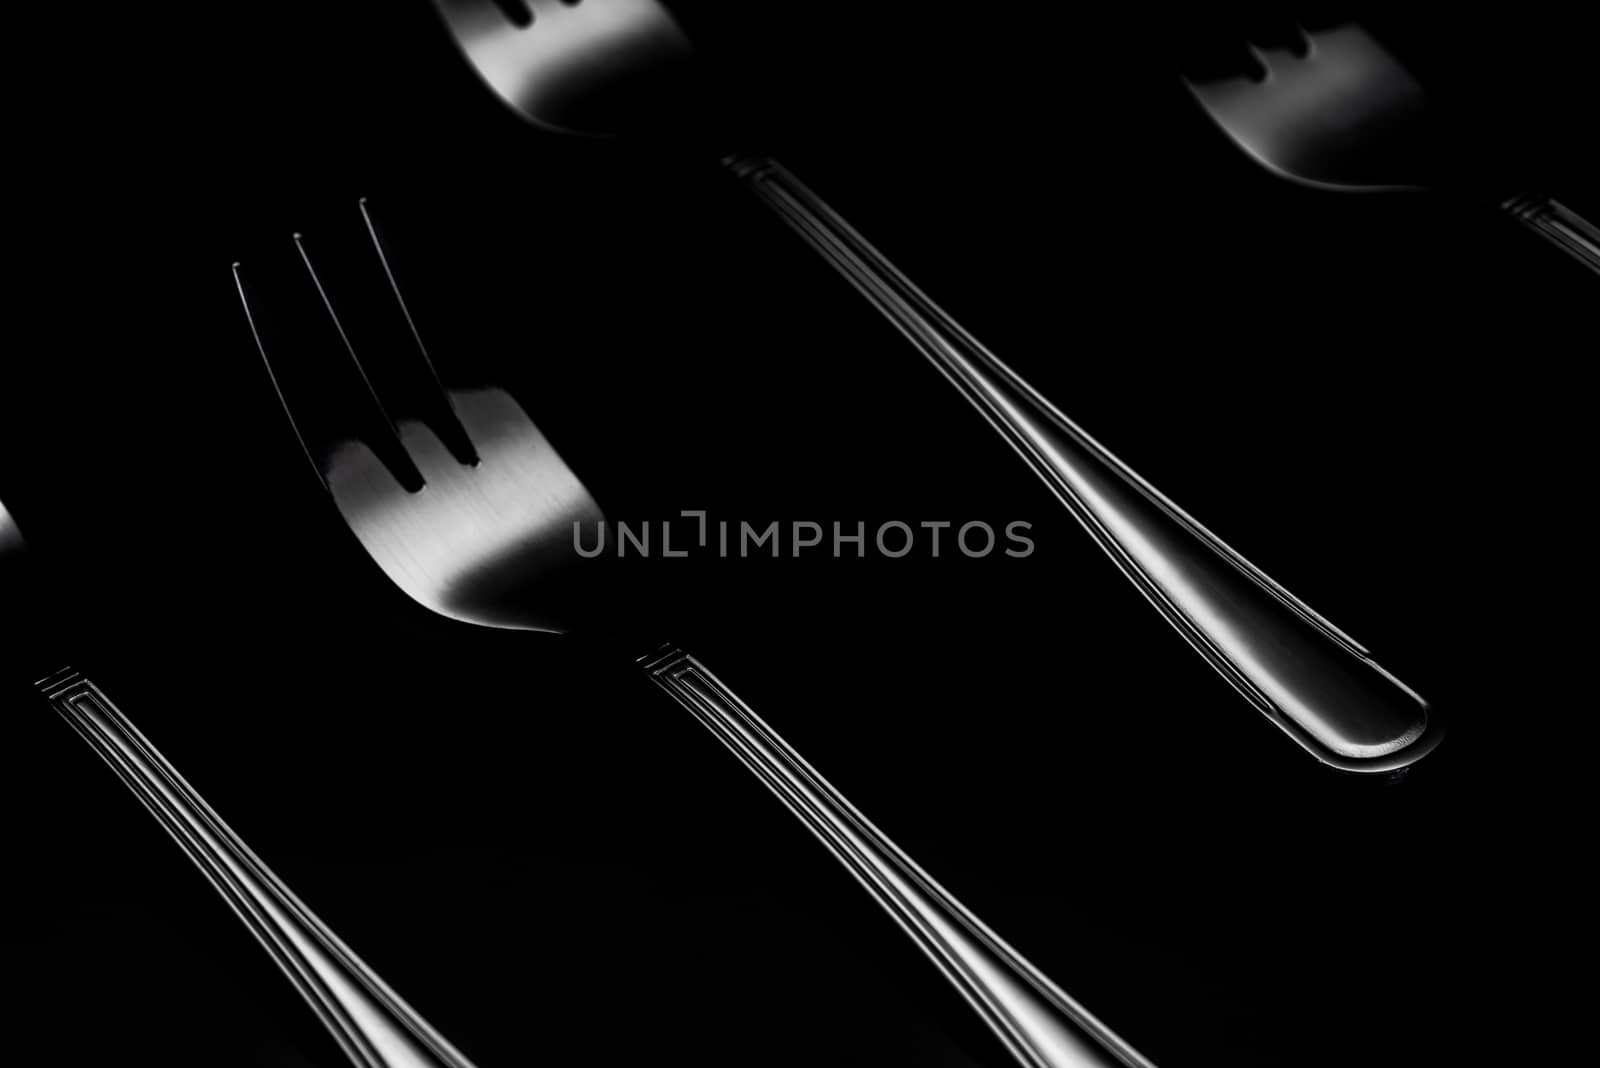 Steel or Silver Forks in Patter. Low Key Dark Image with Shiny Fork Silhouette. Flat Lay Still Life.